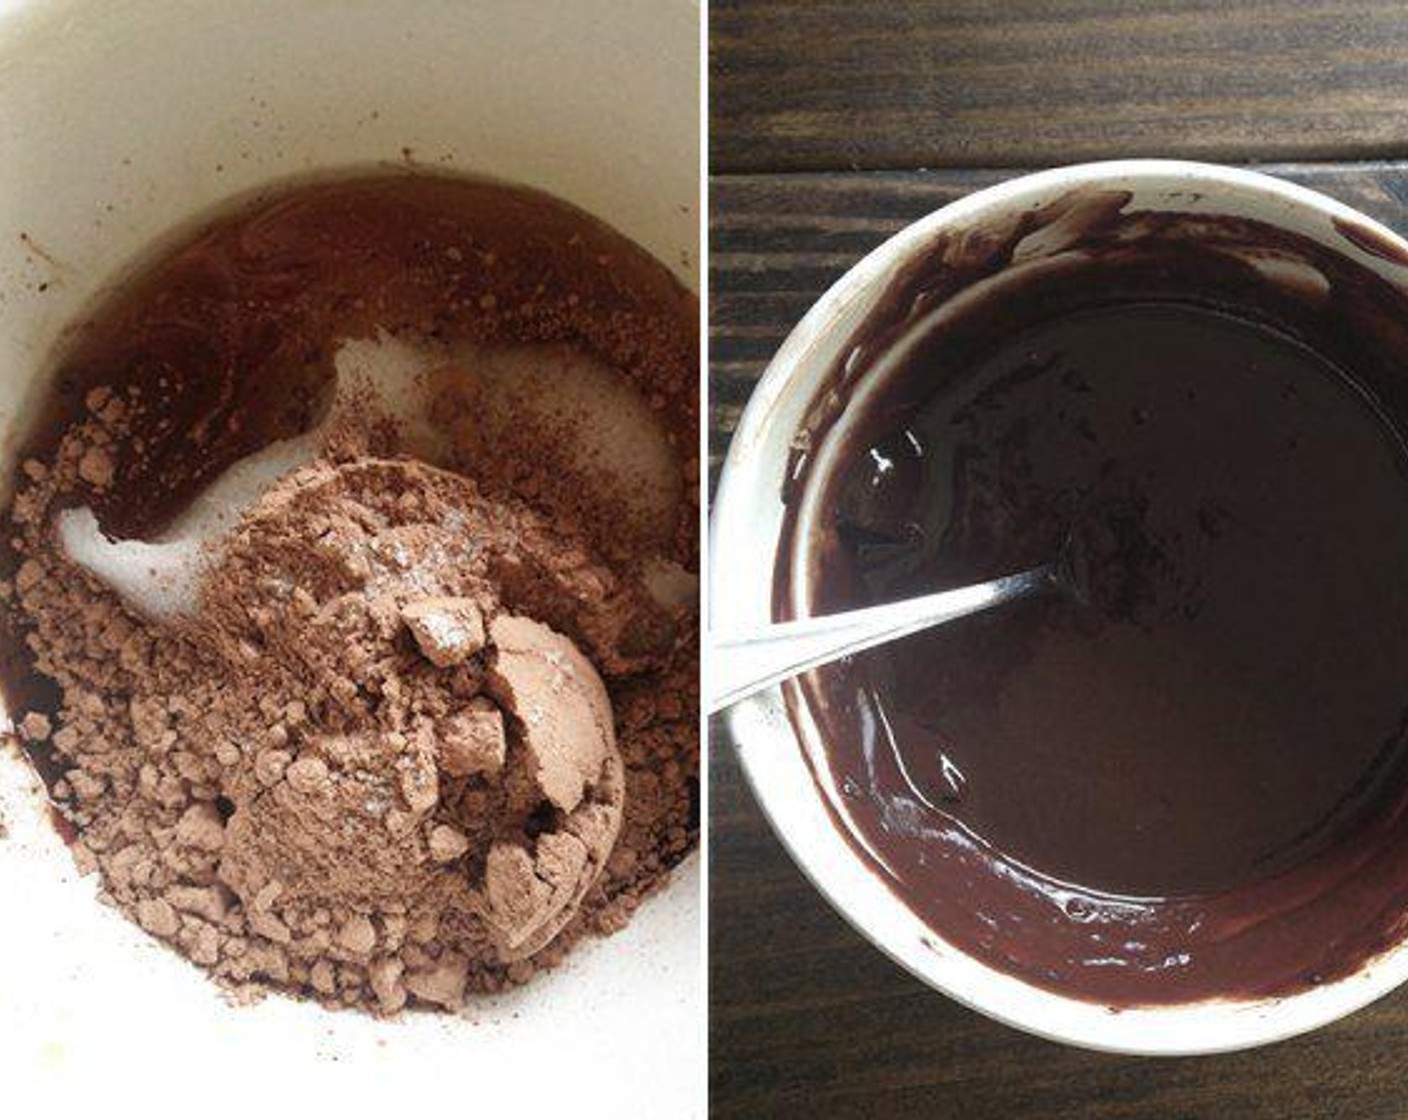 step 5 To make the chocolate sauce: Whisk together the Coconut Oil (1/3 cup), Pure Maple Syrup (1/4 cup), Unsweetened Cocoa Powder (1/4 cup), Dark Chocolate (1/4 cup), and Fine Sea Salt (1/4 tsp) until no clumps remain.